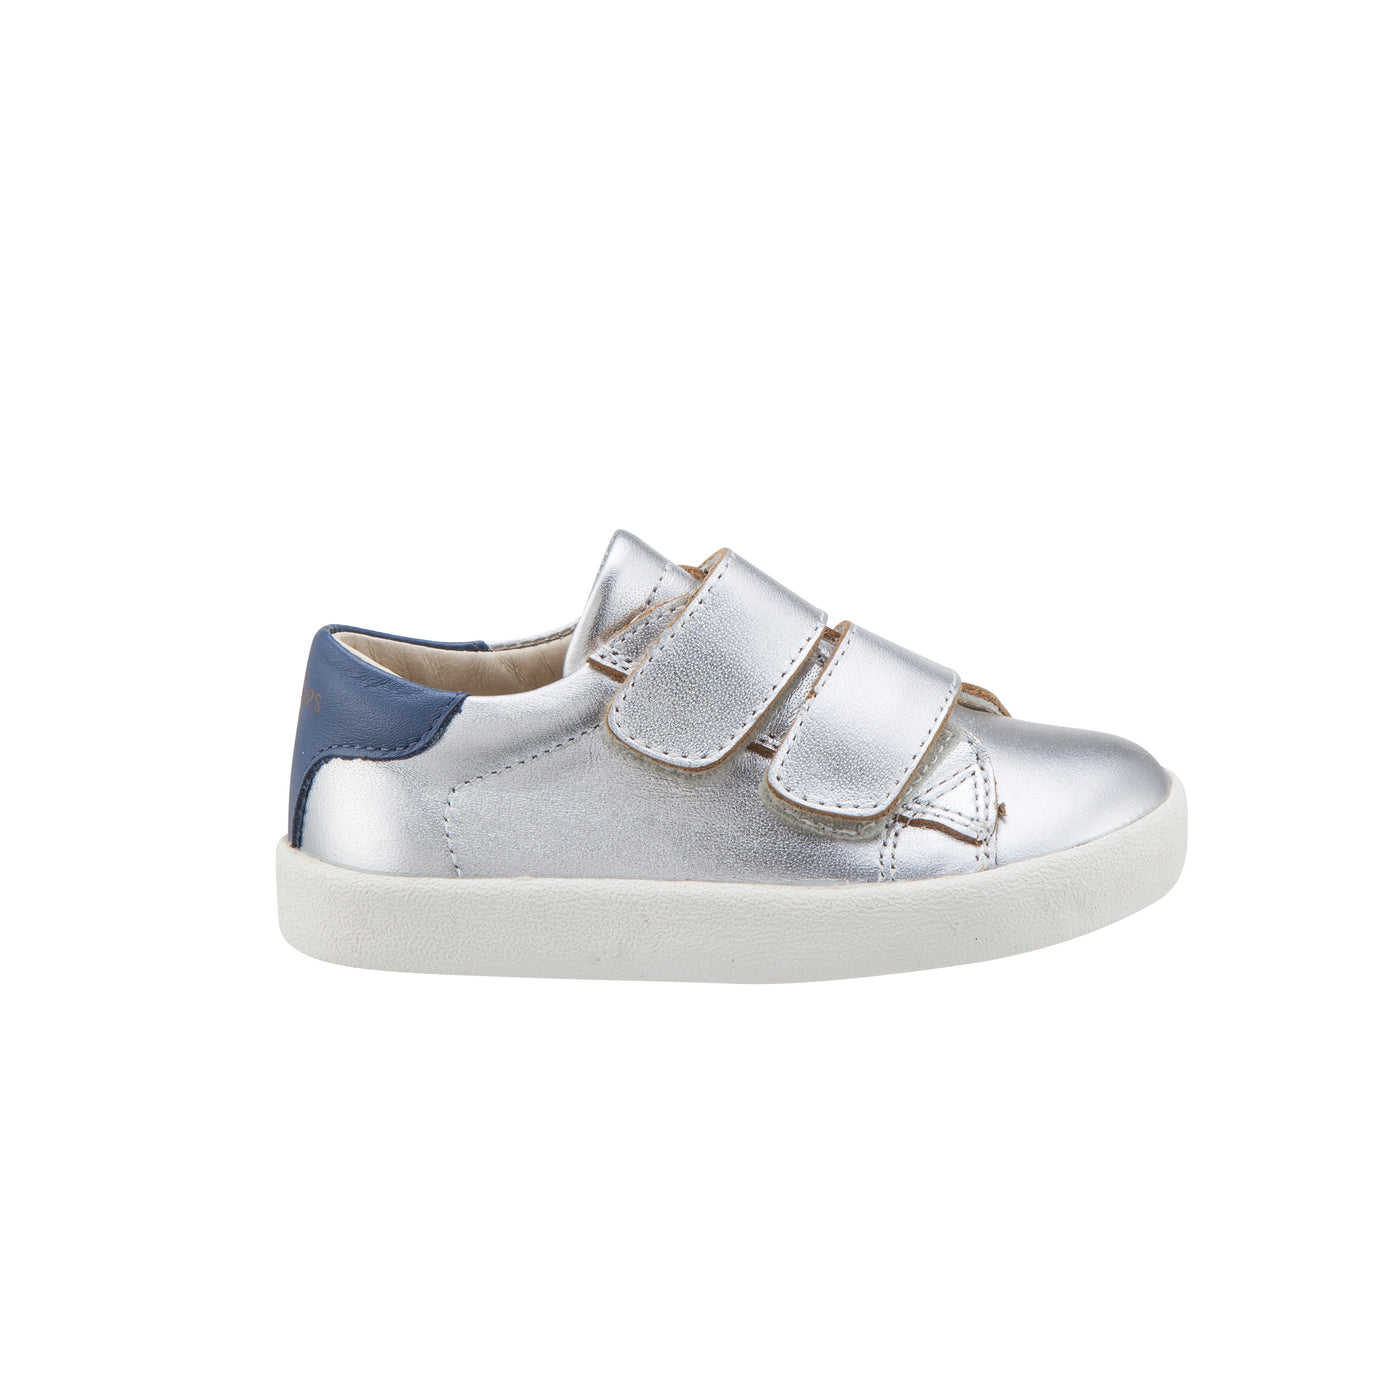 Old Soles Baby 5017 Toddy Leather Sneakers in Silver / Jean